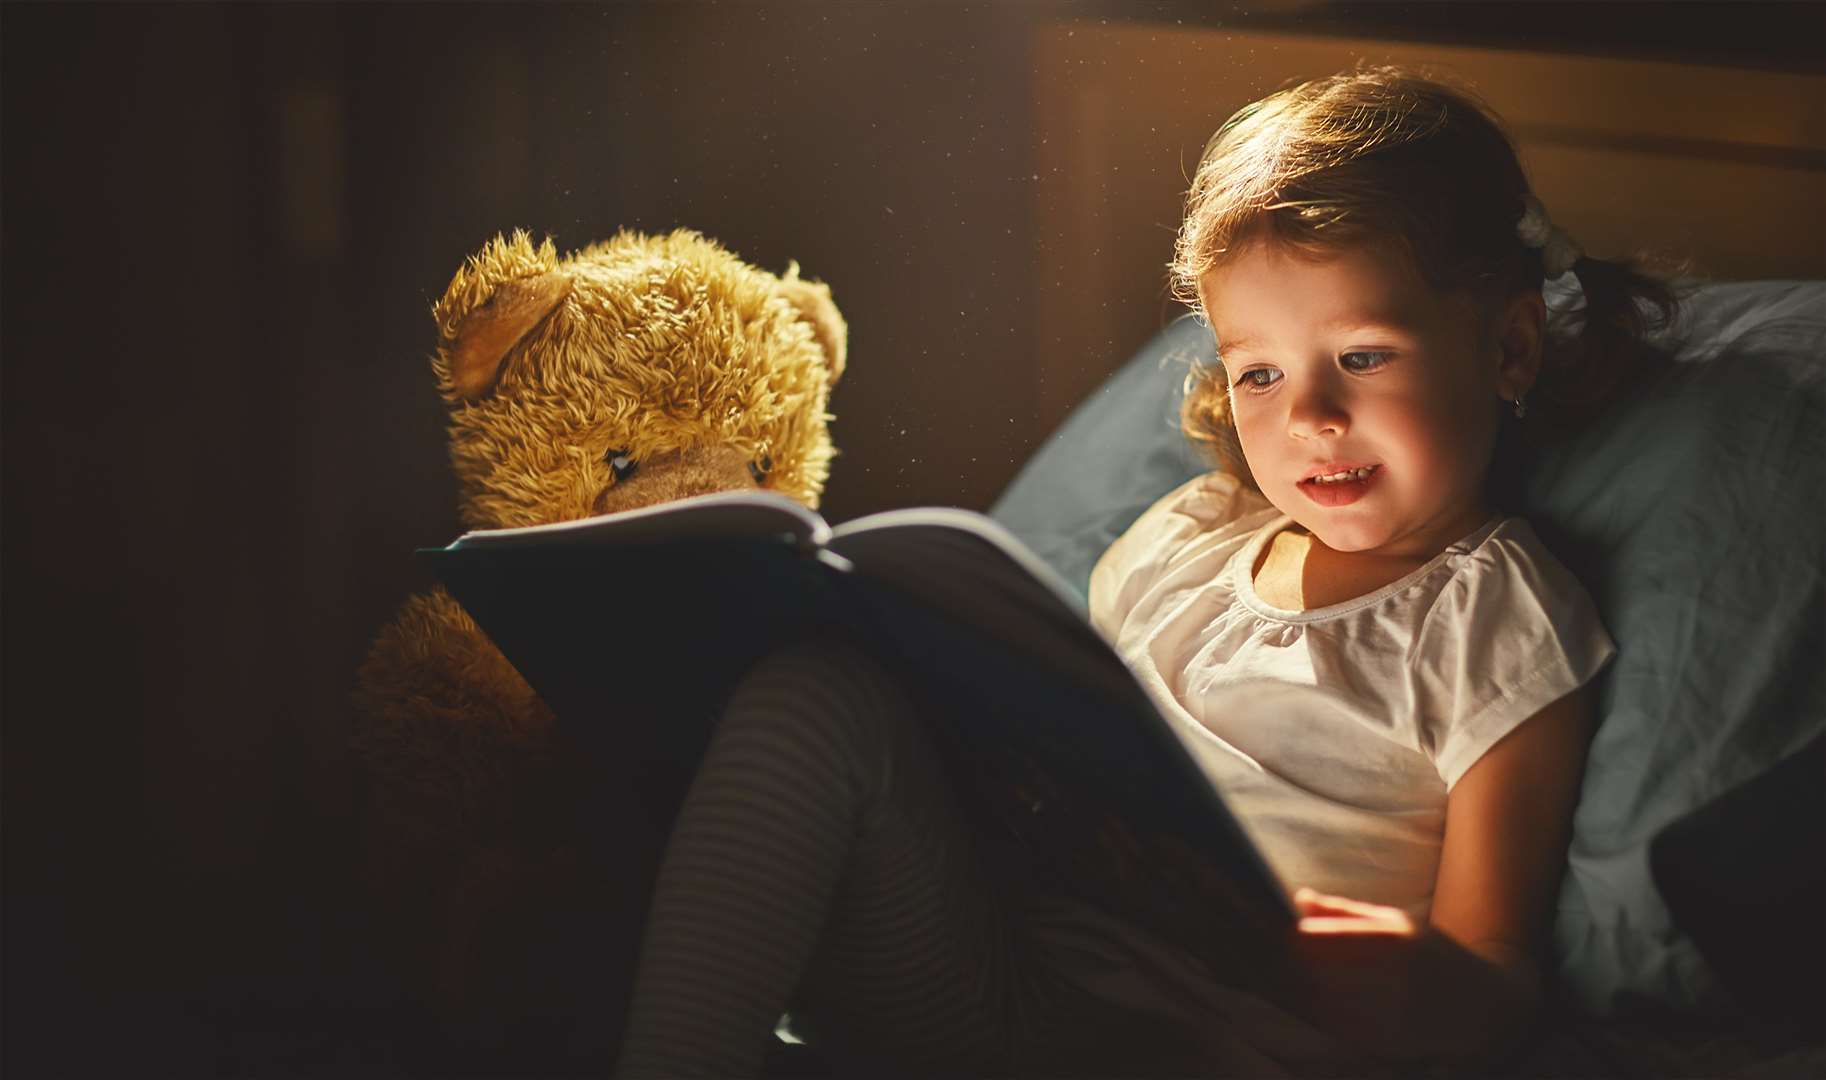 Try to keep to a normal routine where possible, which could include a bedtime story or audio book